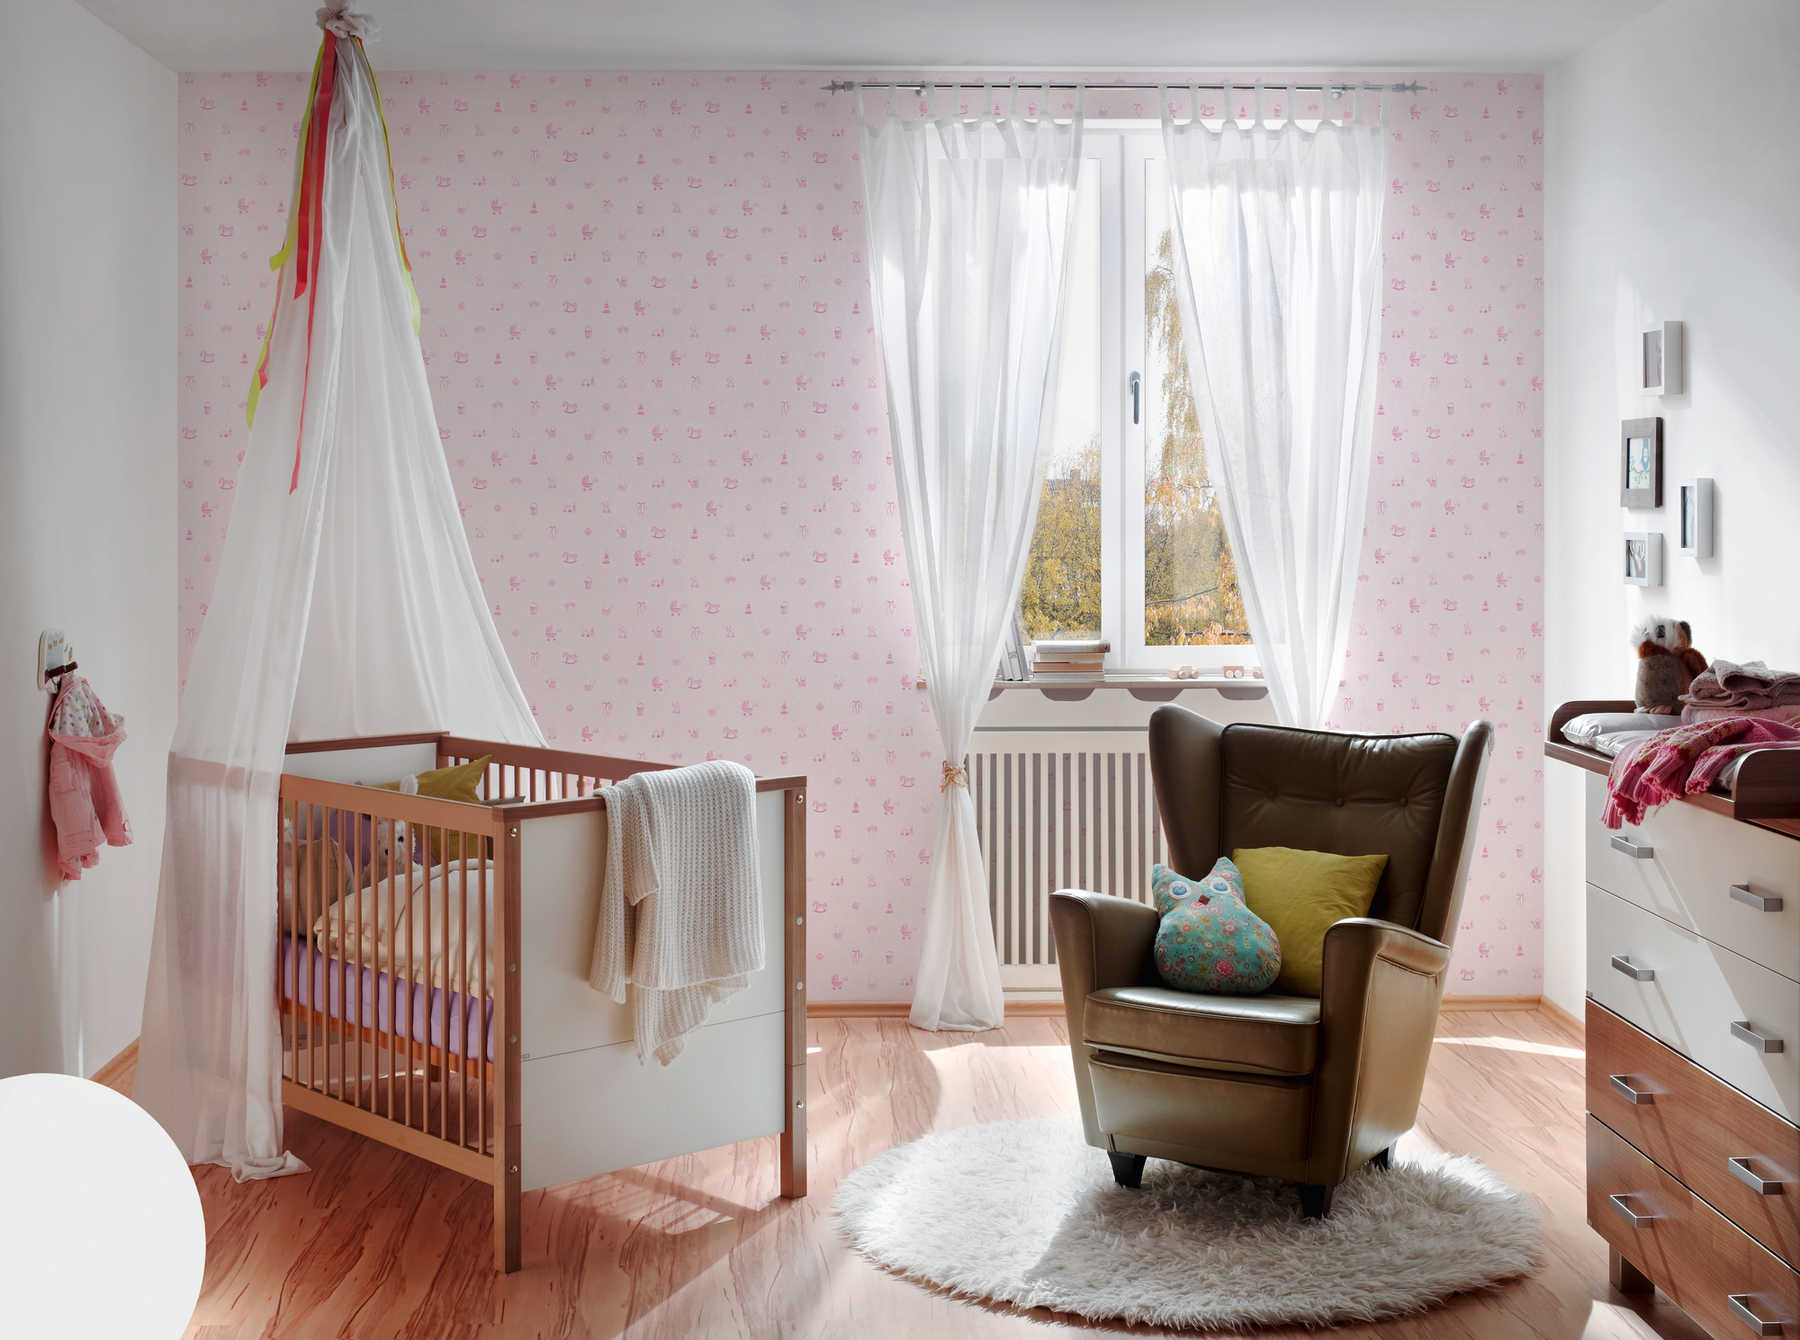             Beautiful baby room wallpaper for girls with pink pattern
        